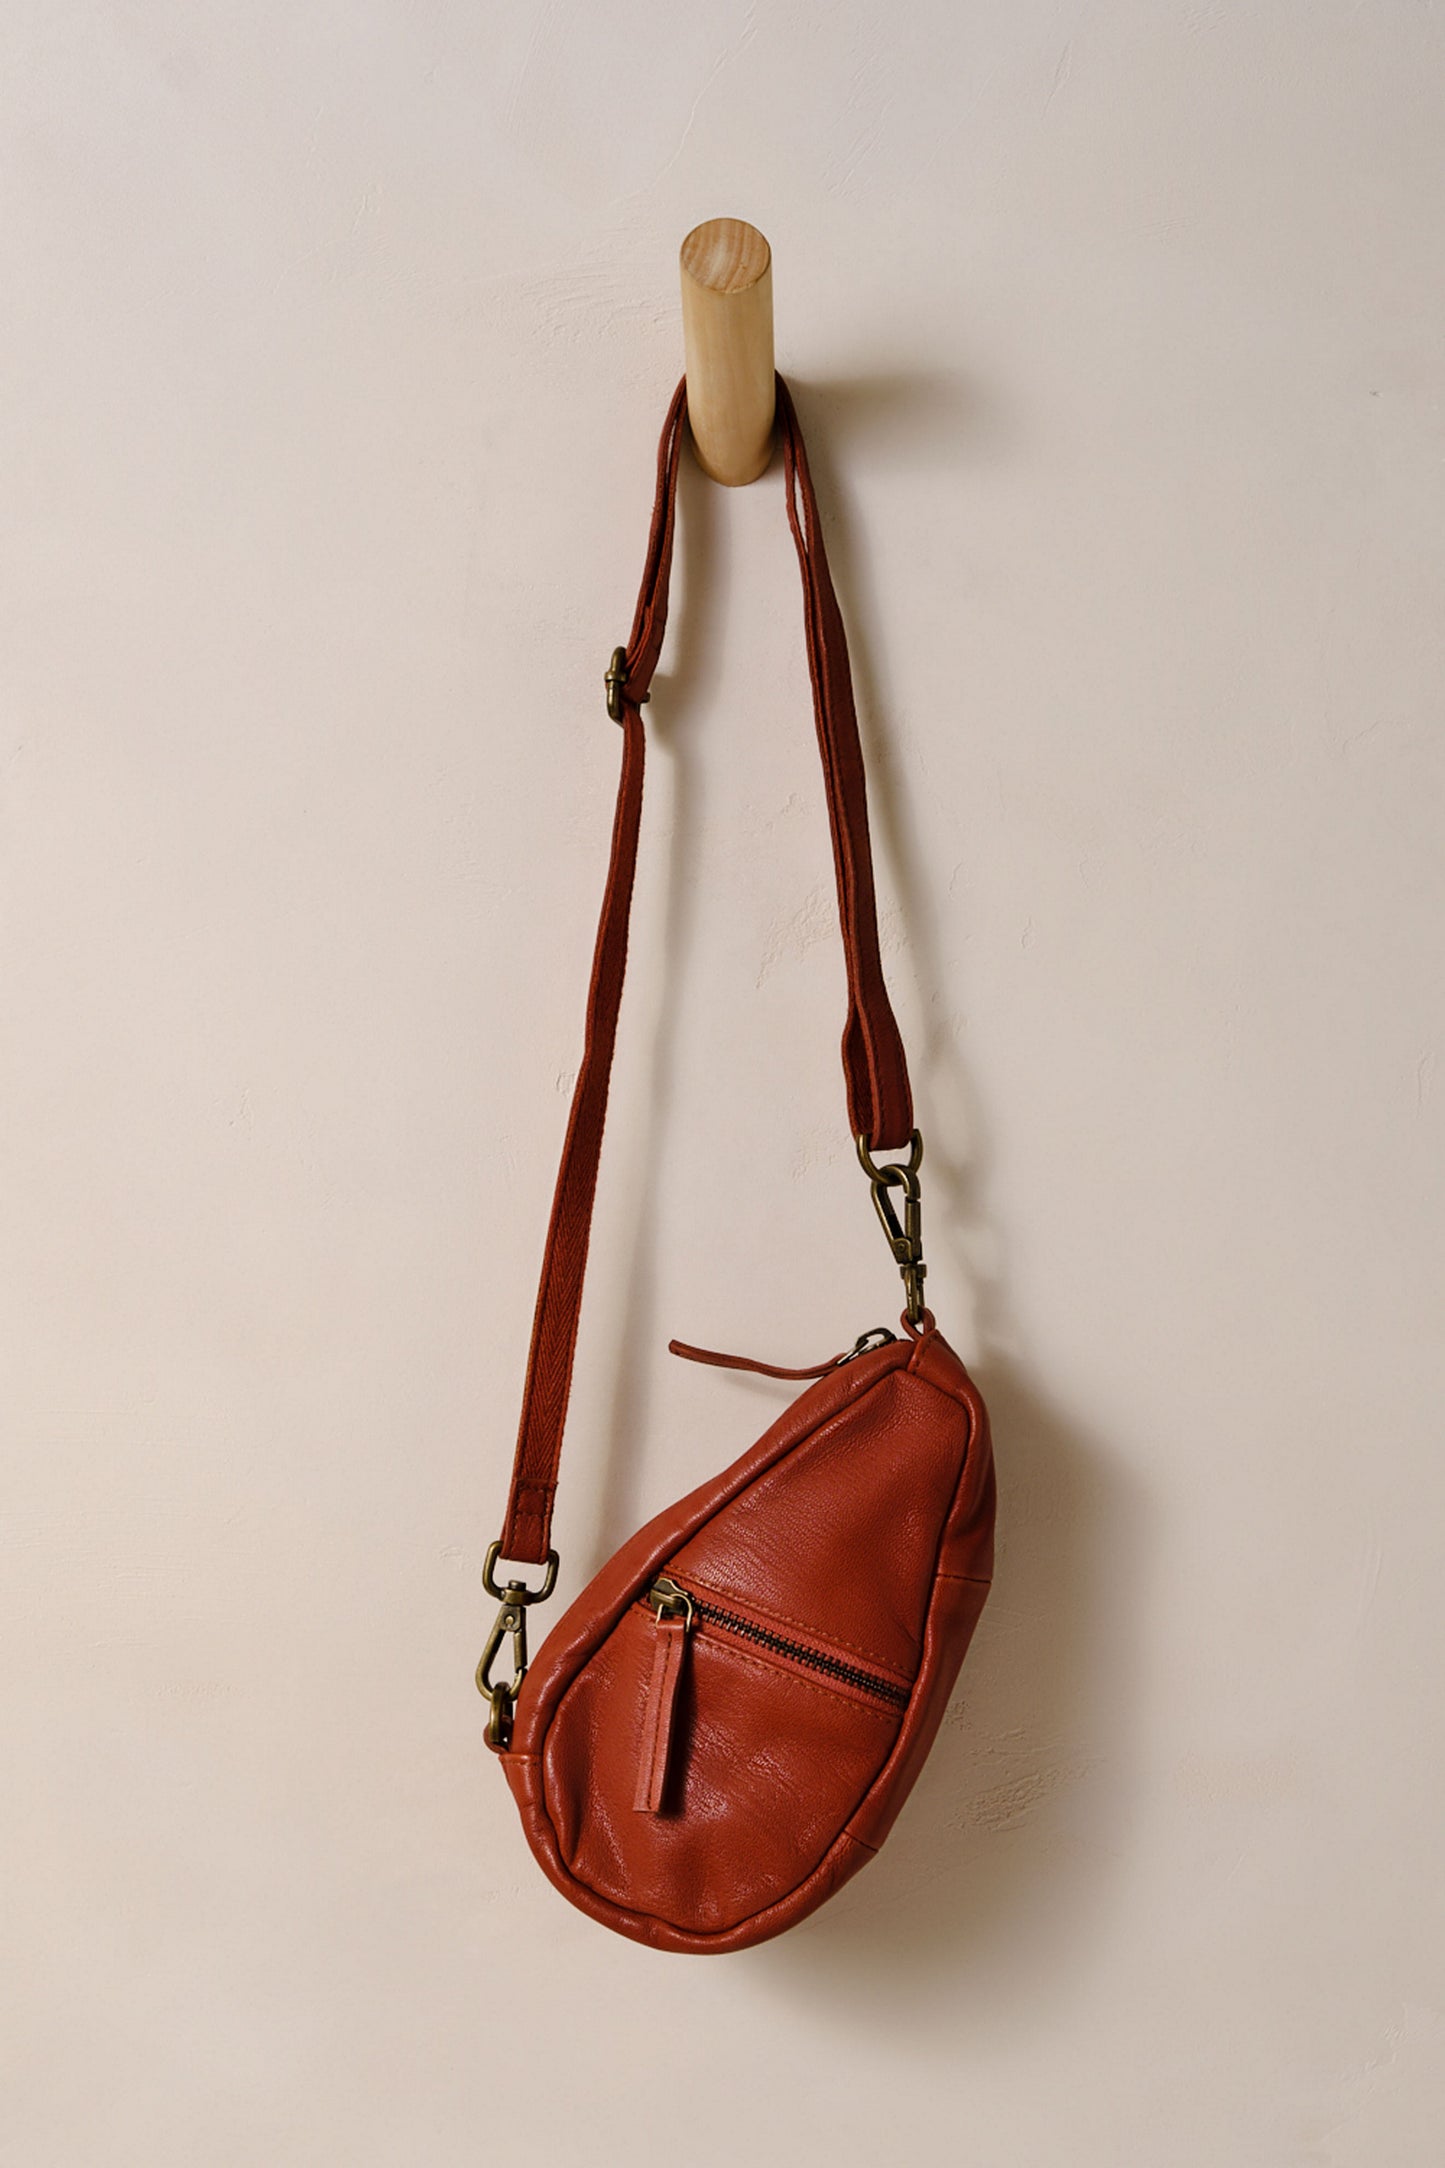 Free People's Coffee Date Mini Crossbody in the color Terracotta